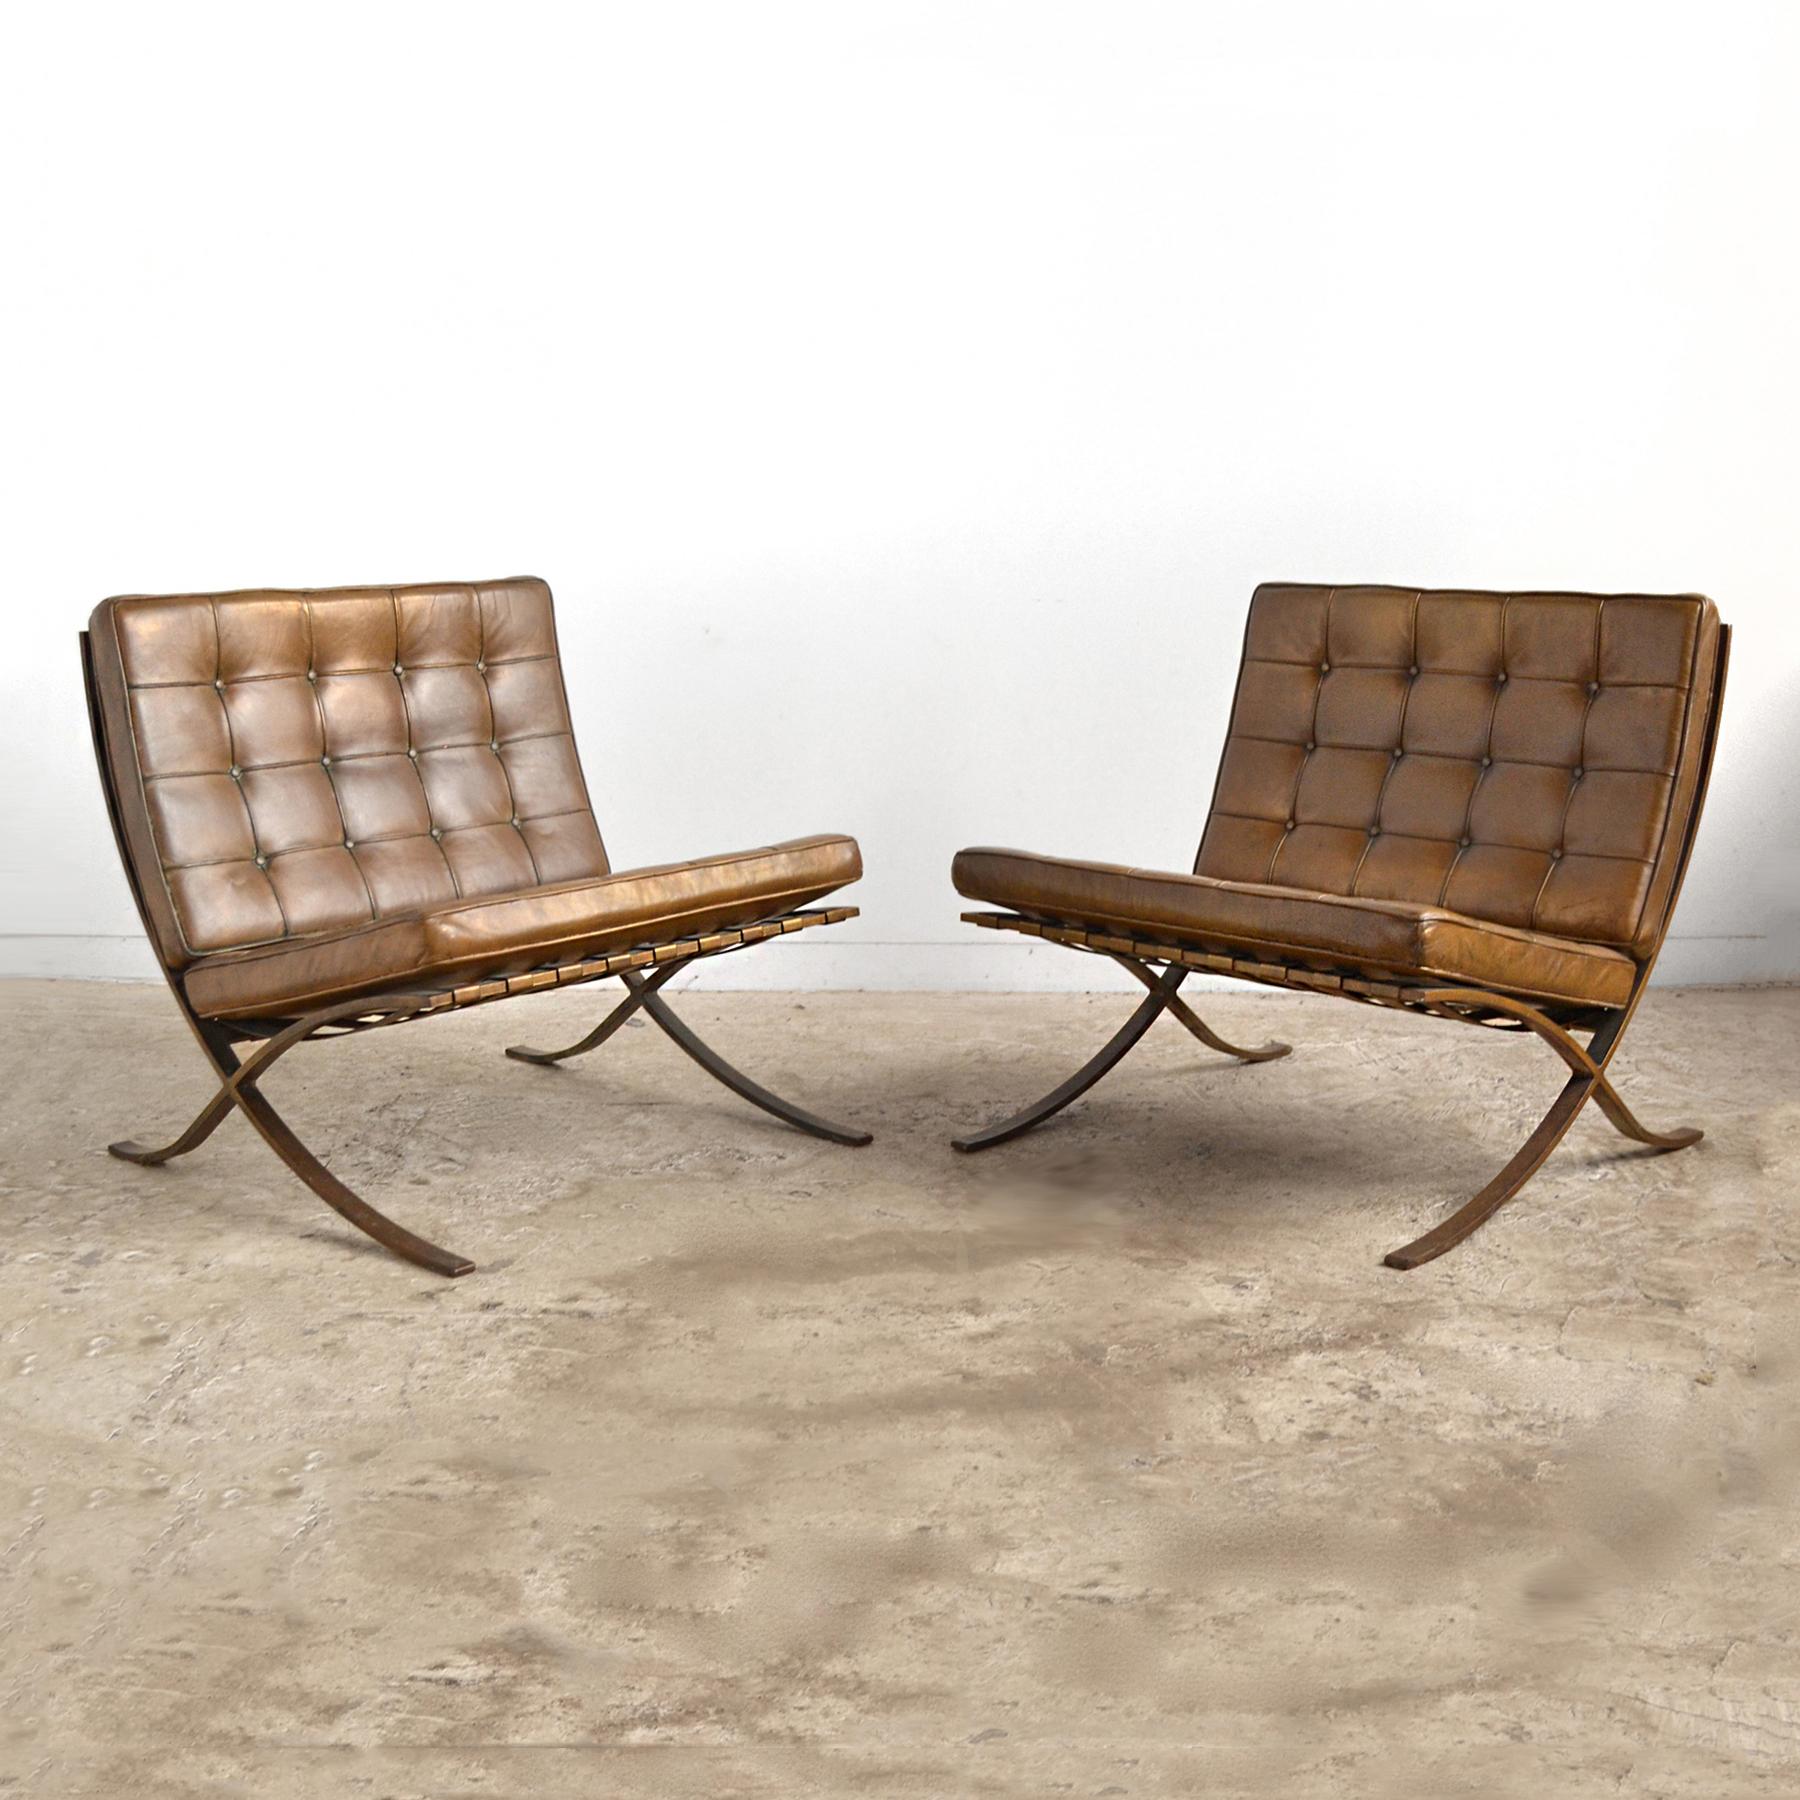 Here are some extraordinarily rare chairs with fantastic provenance, these Mies van der Rohe Barcelona chairs were custom fabricated of fiberglass and steel. You would not know that they are fiberglass without touching them. The level of detail and